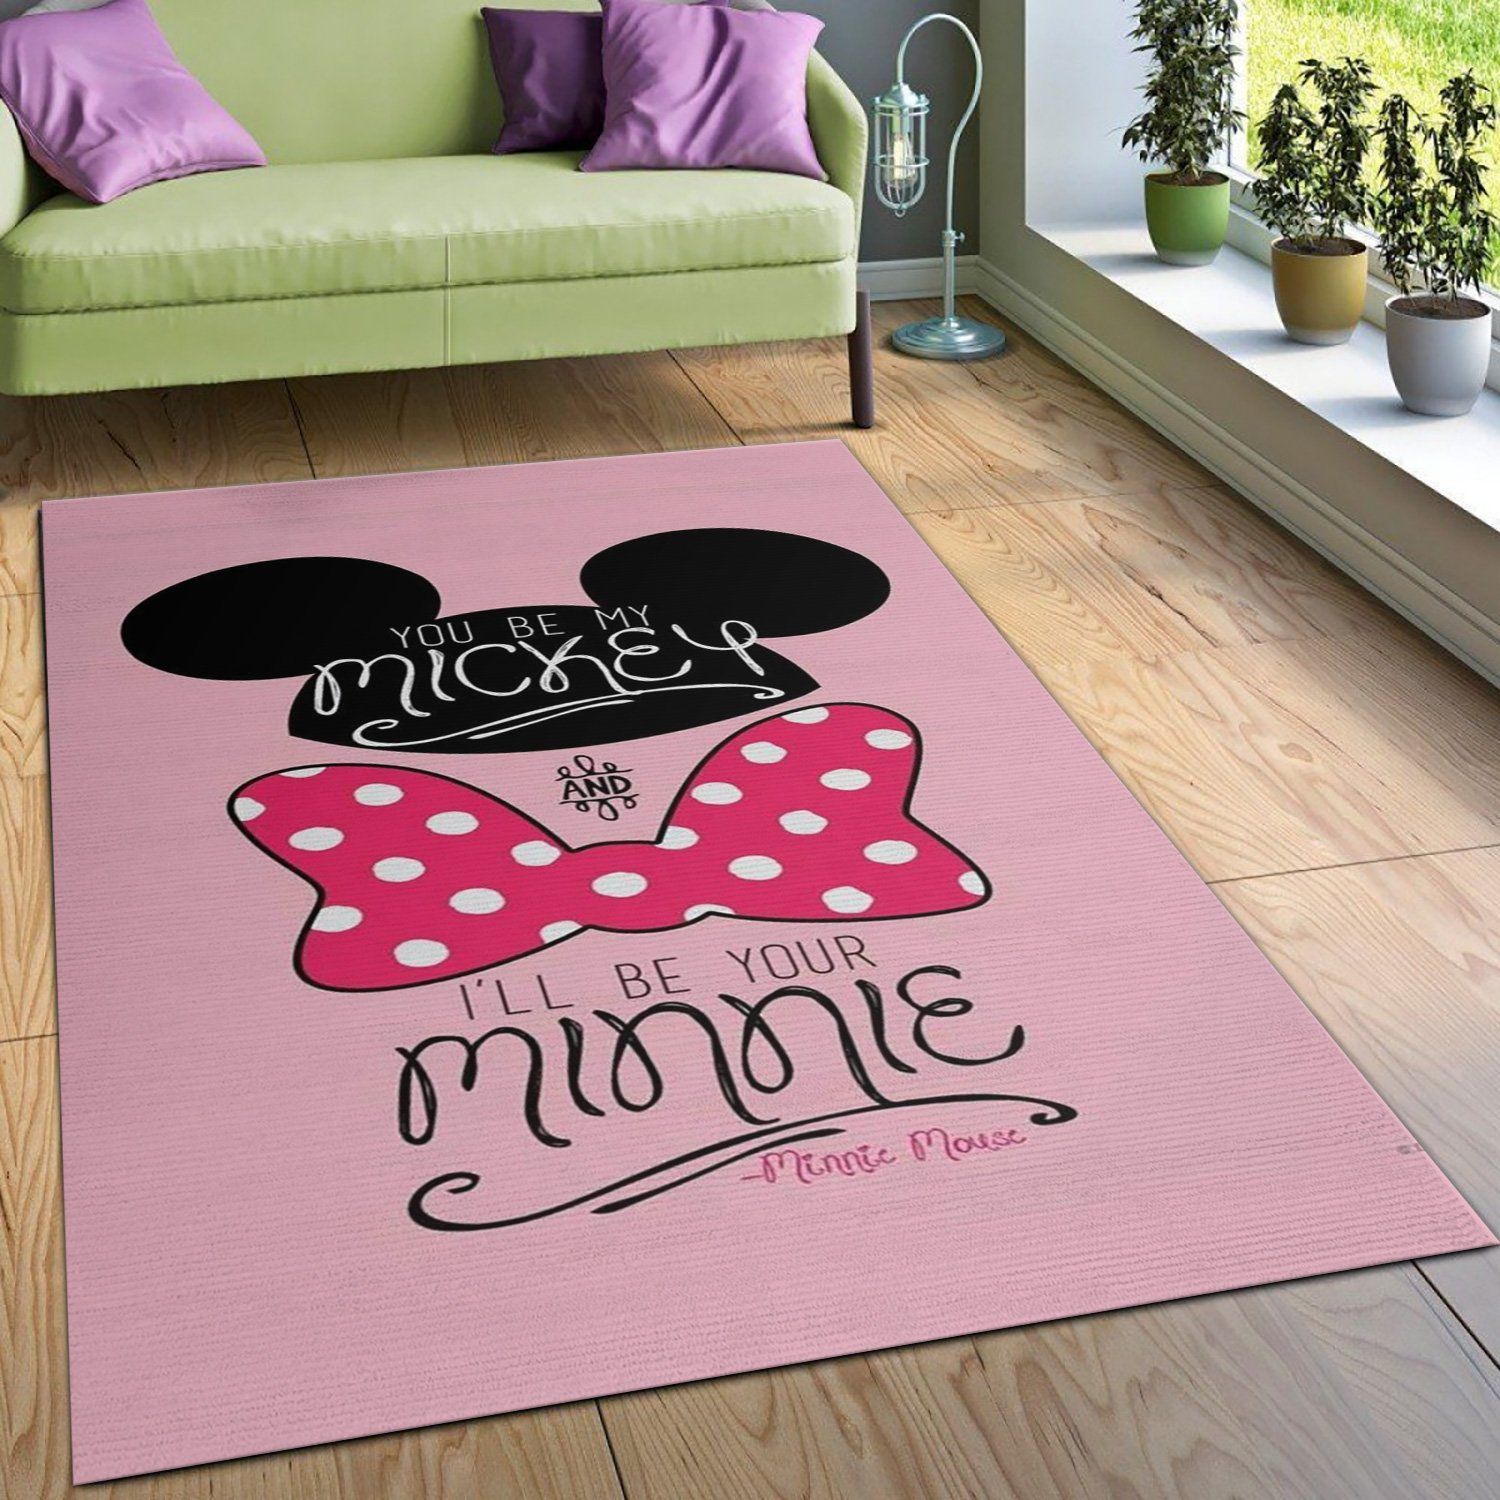 Mickey Minnie Mouse Disney Rug Bedroom Christmas Gift US Decor - Indoor Outdoor Rugs 3